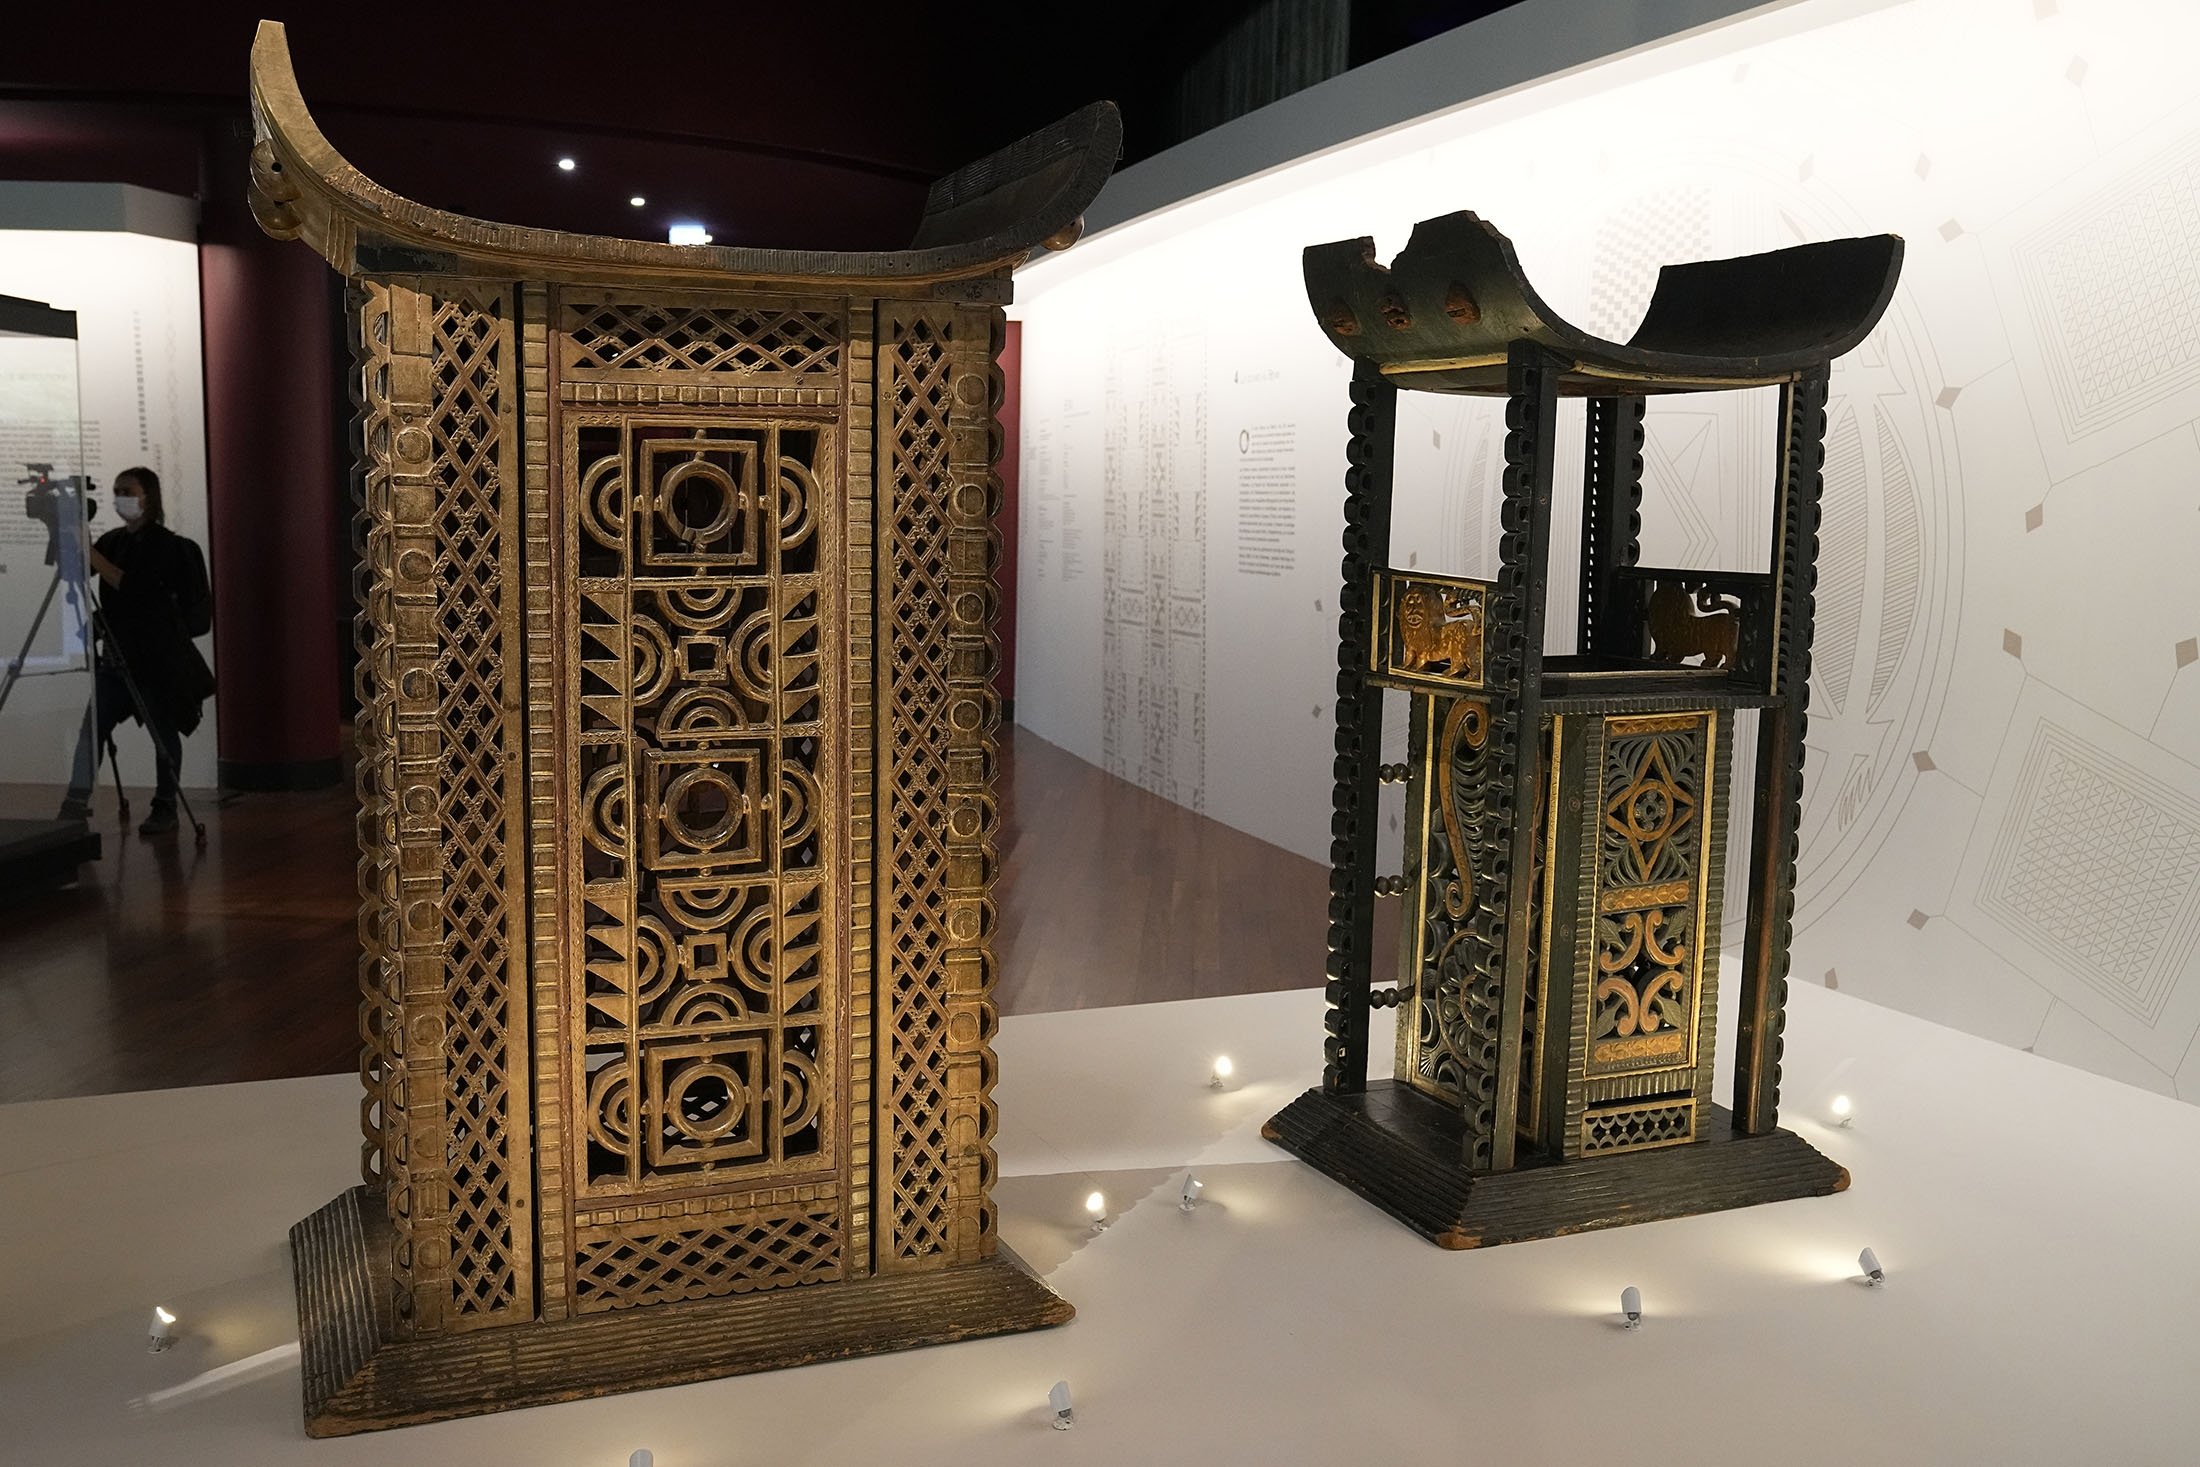 The 19th century Throne of King Ghezo (L) and Throne of King Glele, from Benin, pictured at the Quai Branly – Jacques Chirac museum, in Paris, France, Oct. 25, 2021. (AP Photo)